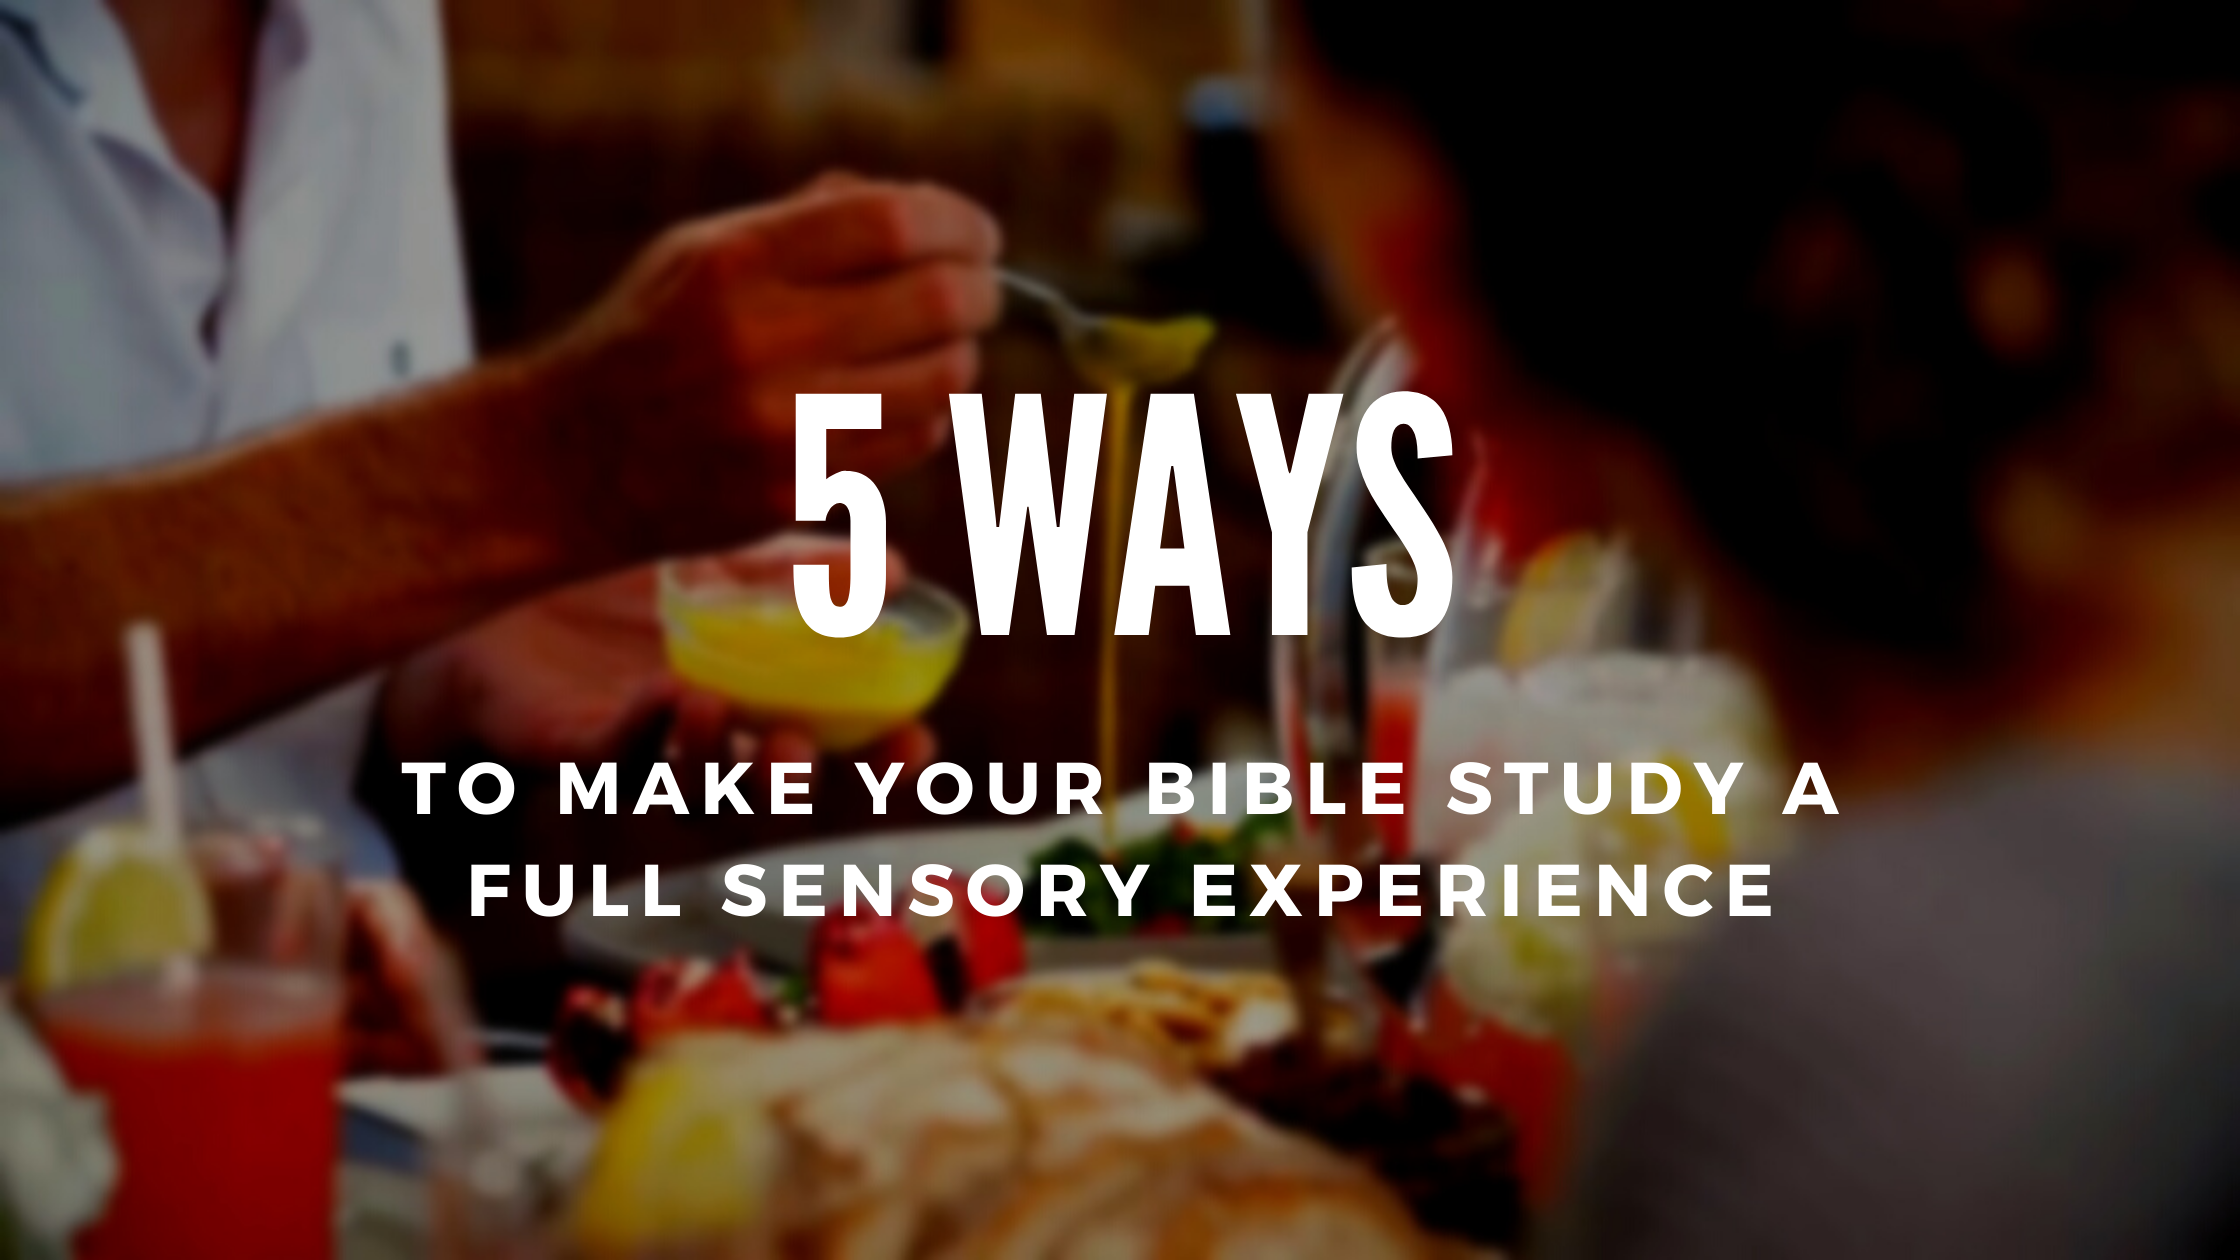 5 Ways to Make Your Bible Study a Full Sensory Experience | Margaret Feinberg